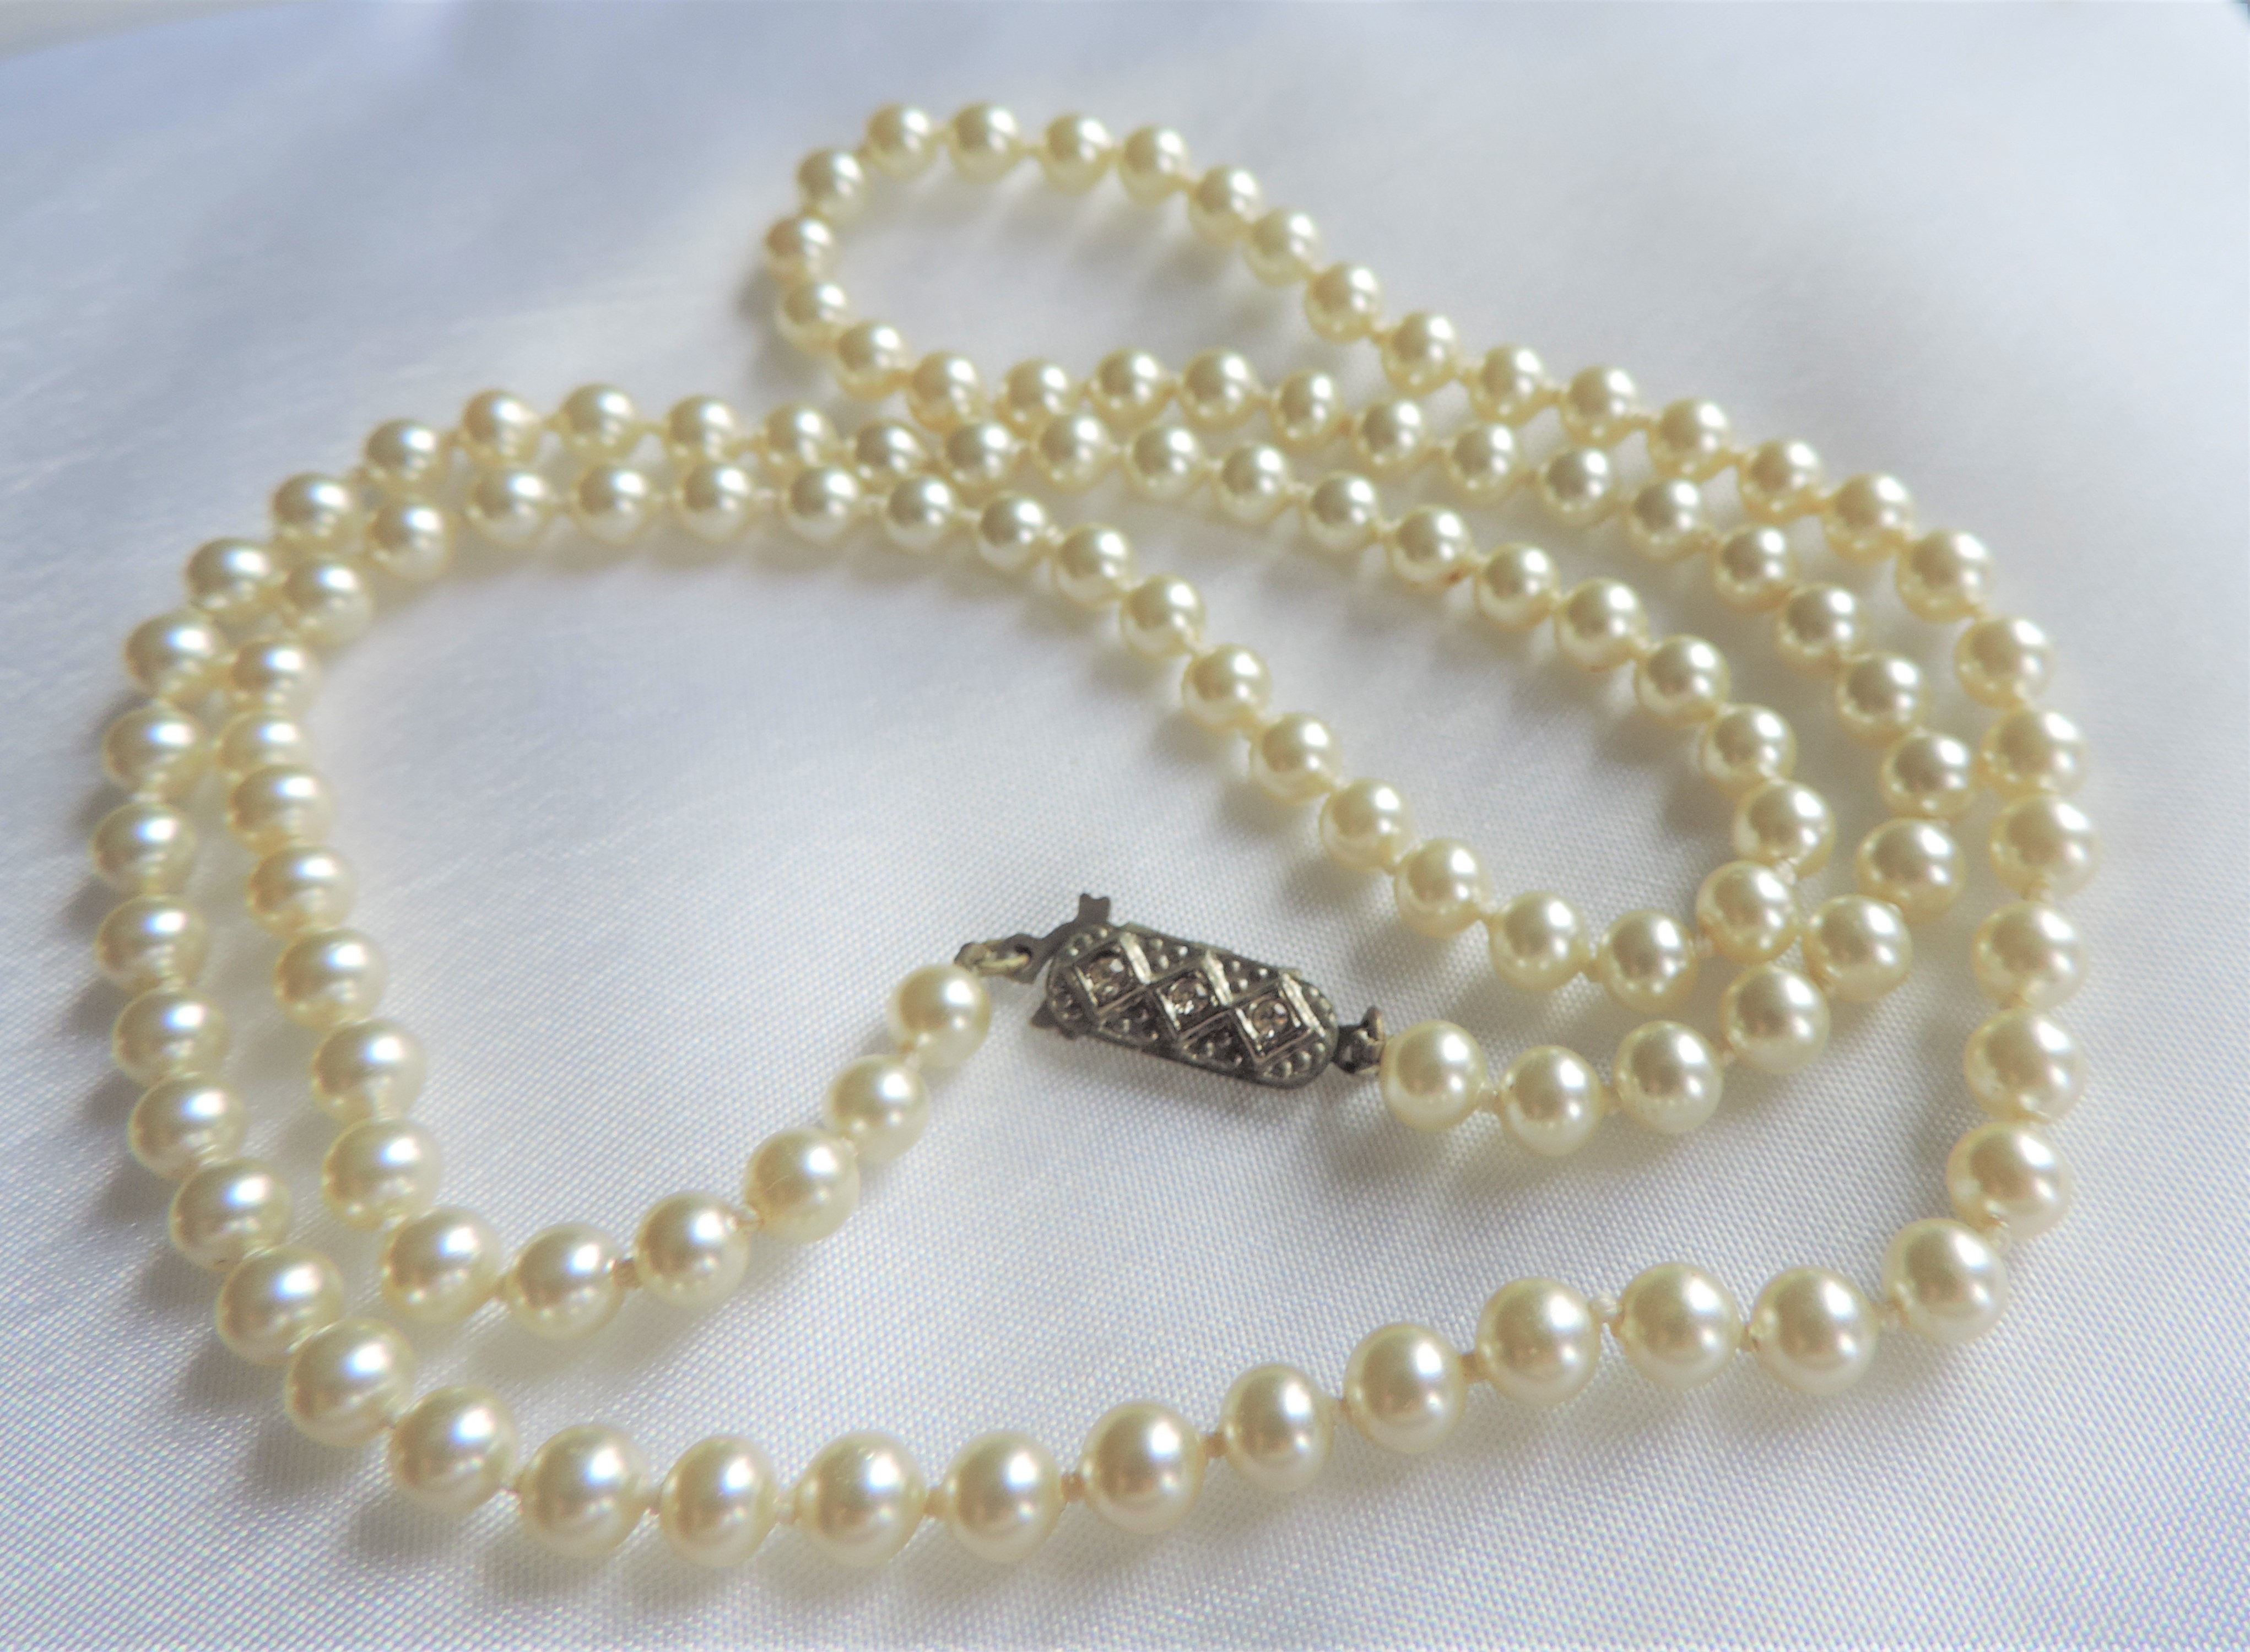 Vintage 25 inch Single Strand Pearl Necklace with Gift Pouch - Image 2 of 2